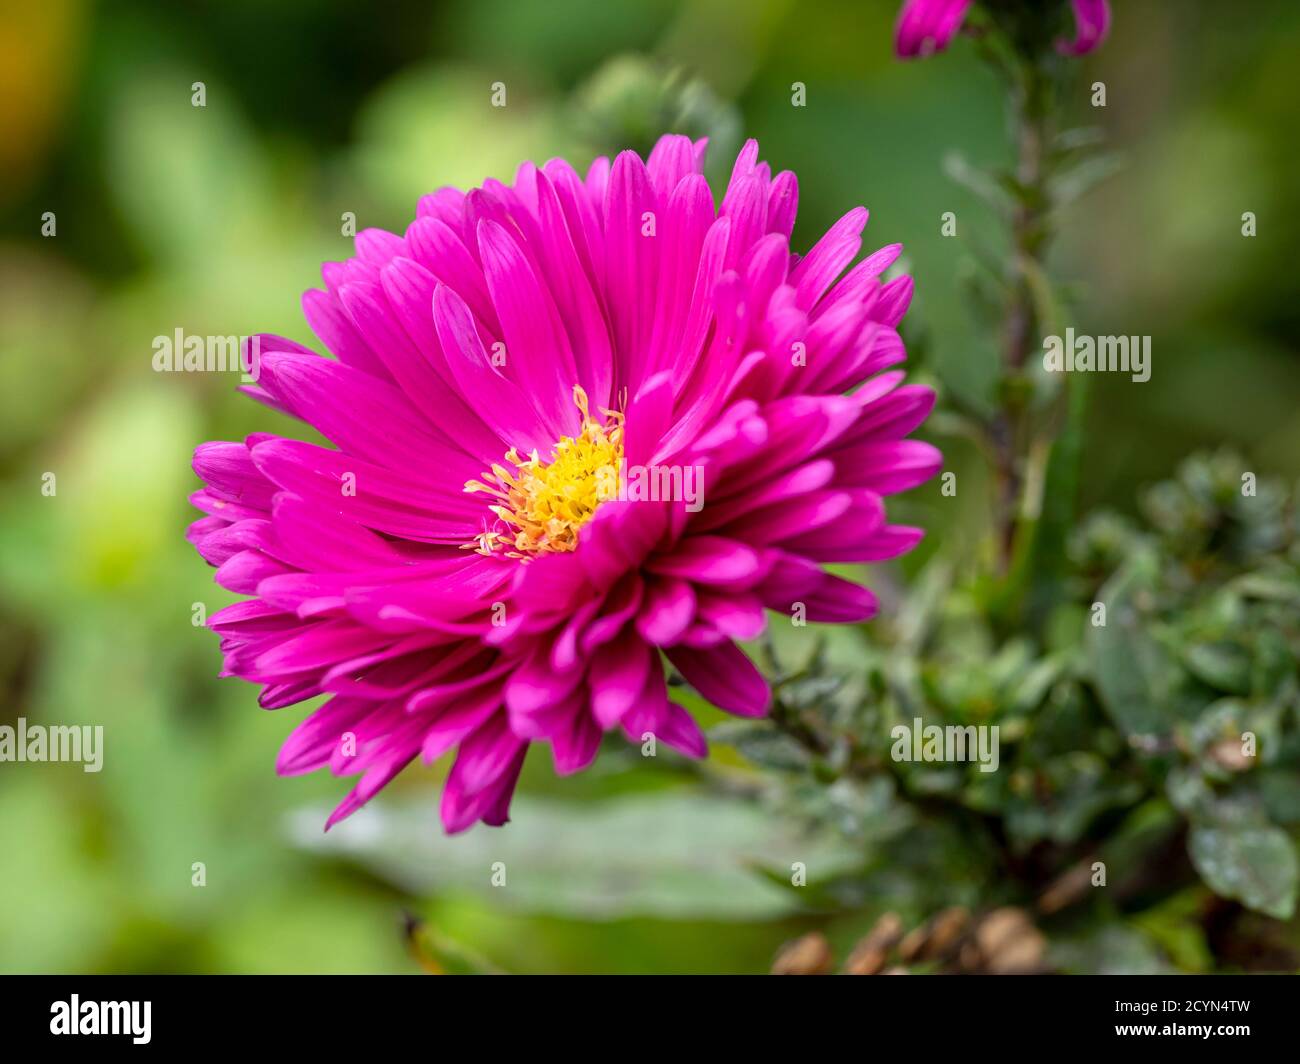 Closeup of a beautiful pink aster flower in a garden, variety Aster novi-belgii Carnival Stock Photo